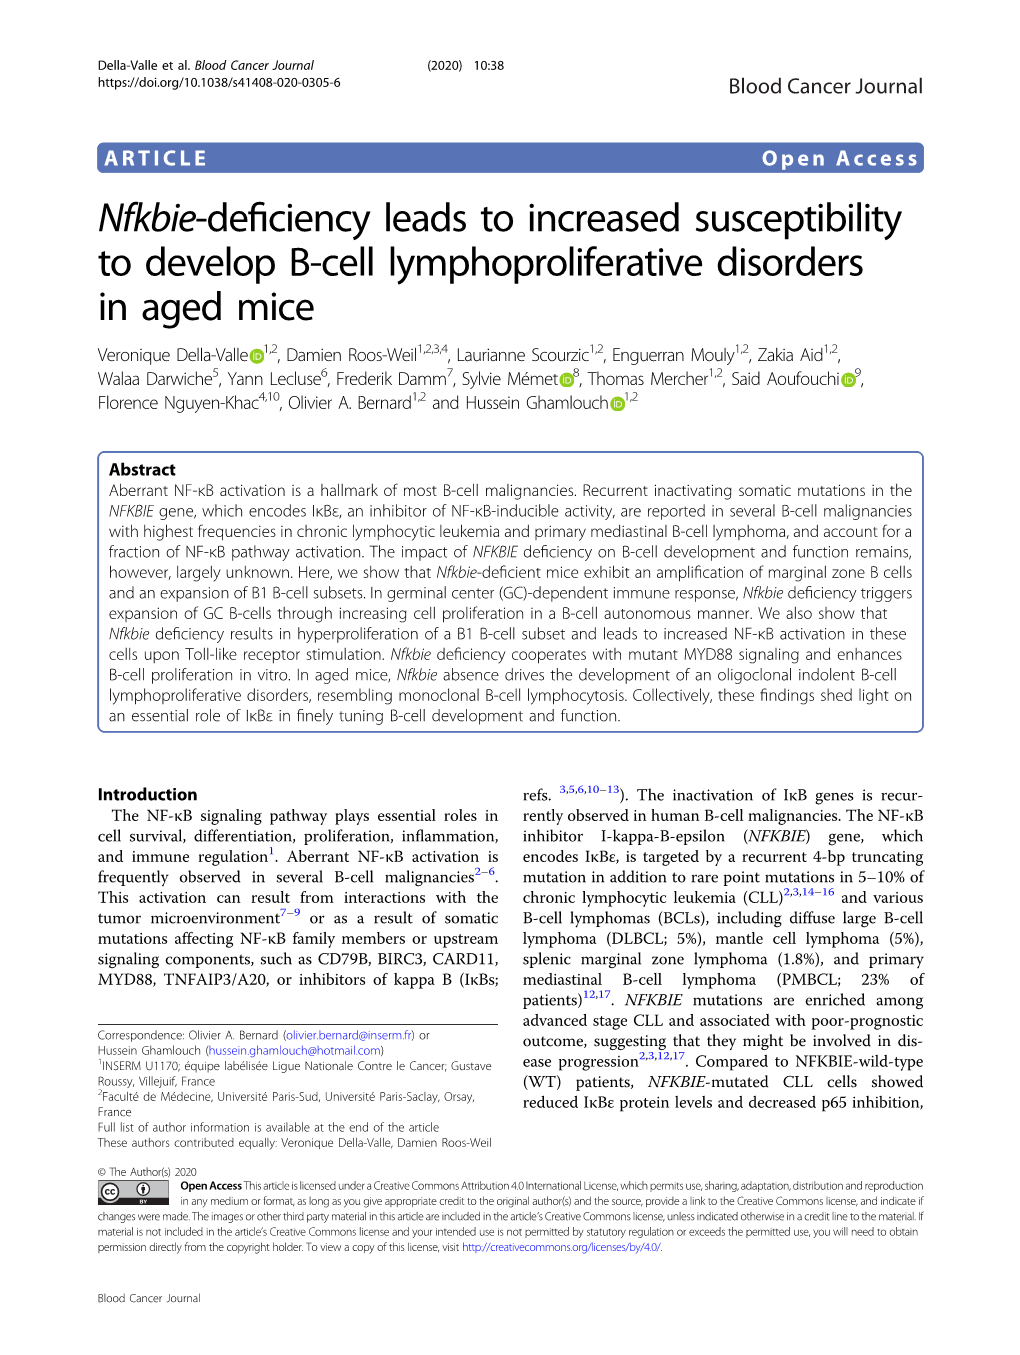 Nfkbie-Deficiency Leads to Increased Susceptibility to Develop B-Cell